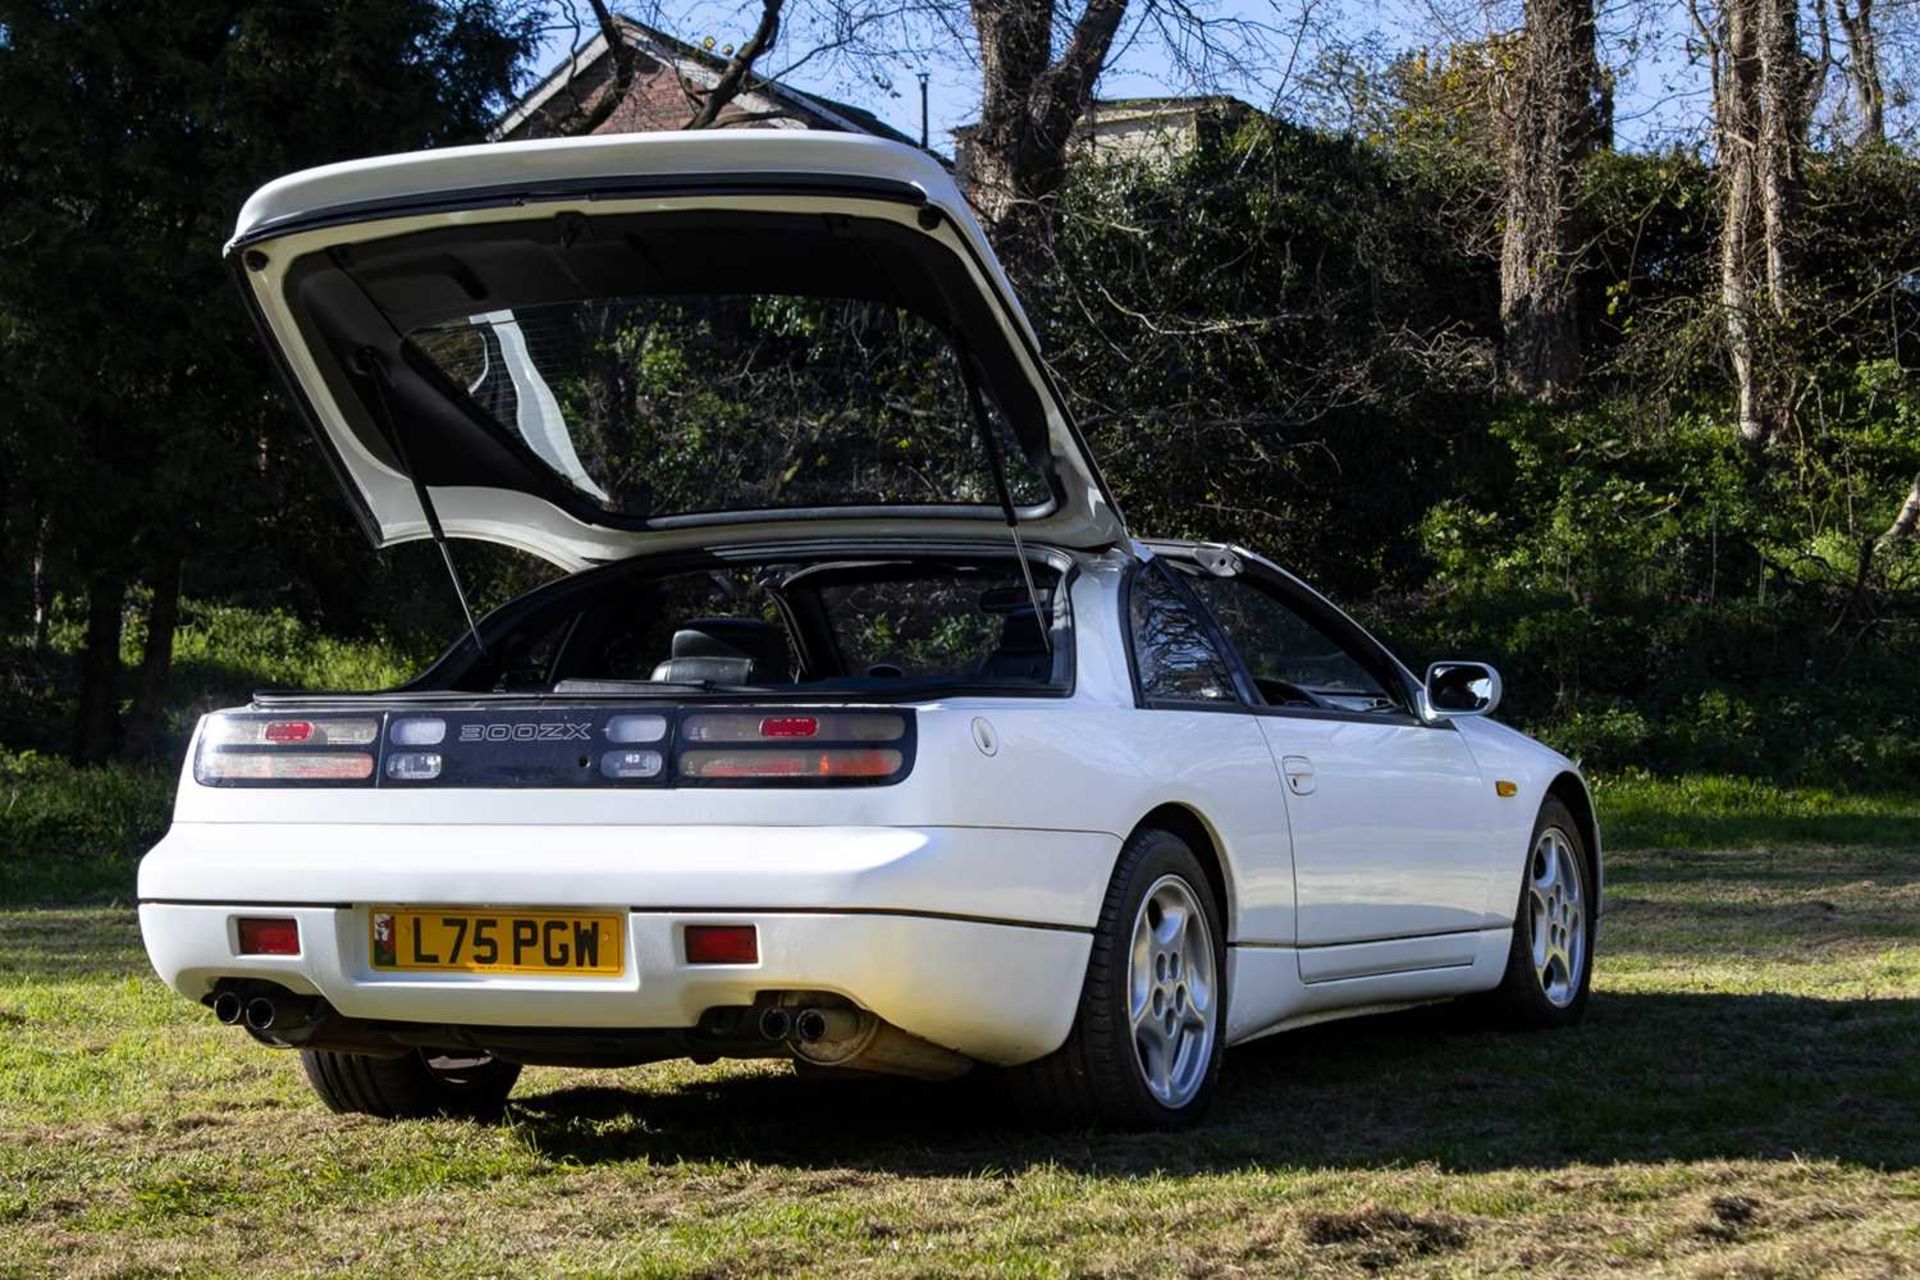 1990 Nissan 300ZX Turbo 2+2 Targa One of the last examples registered in the UK - Image 82 of 89